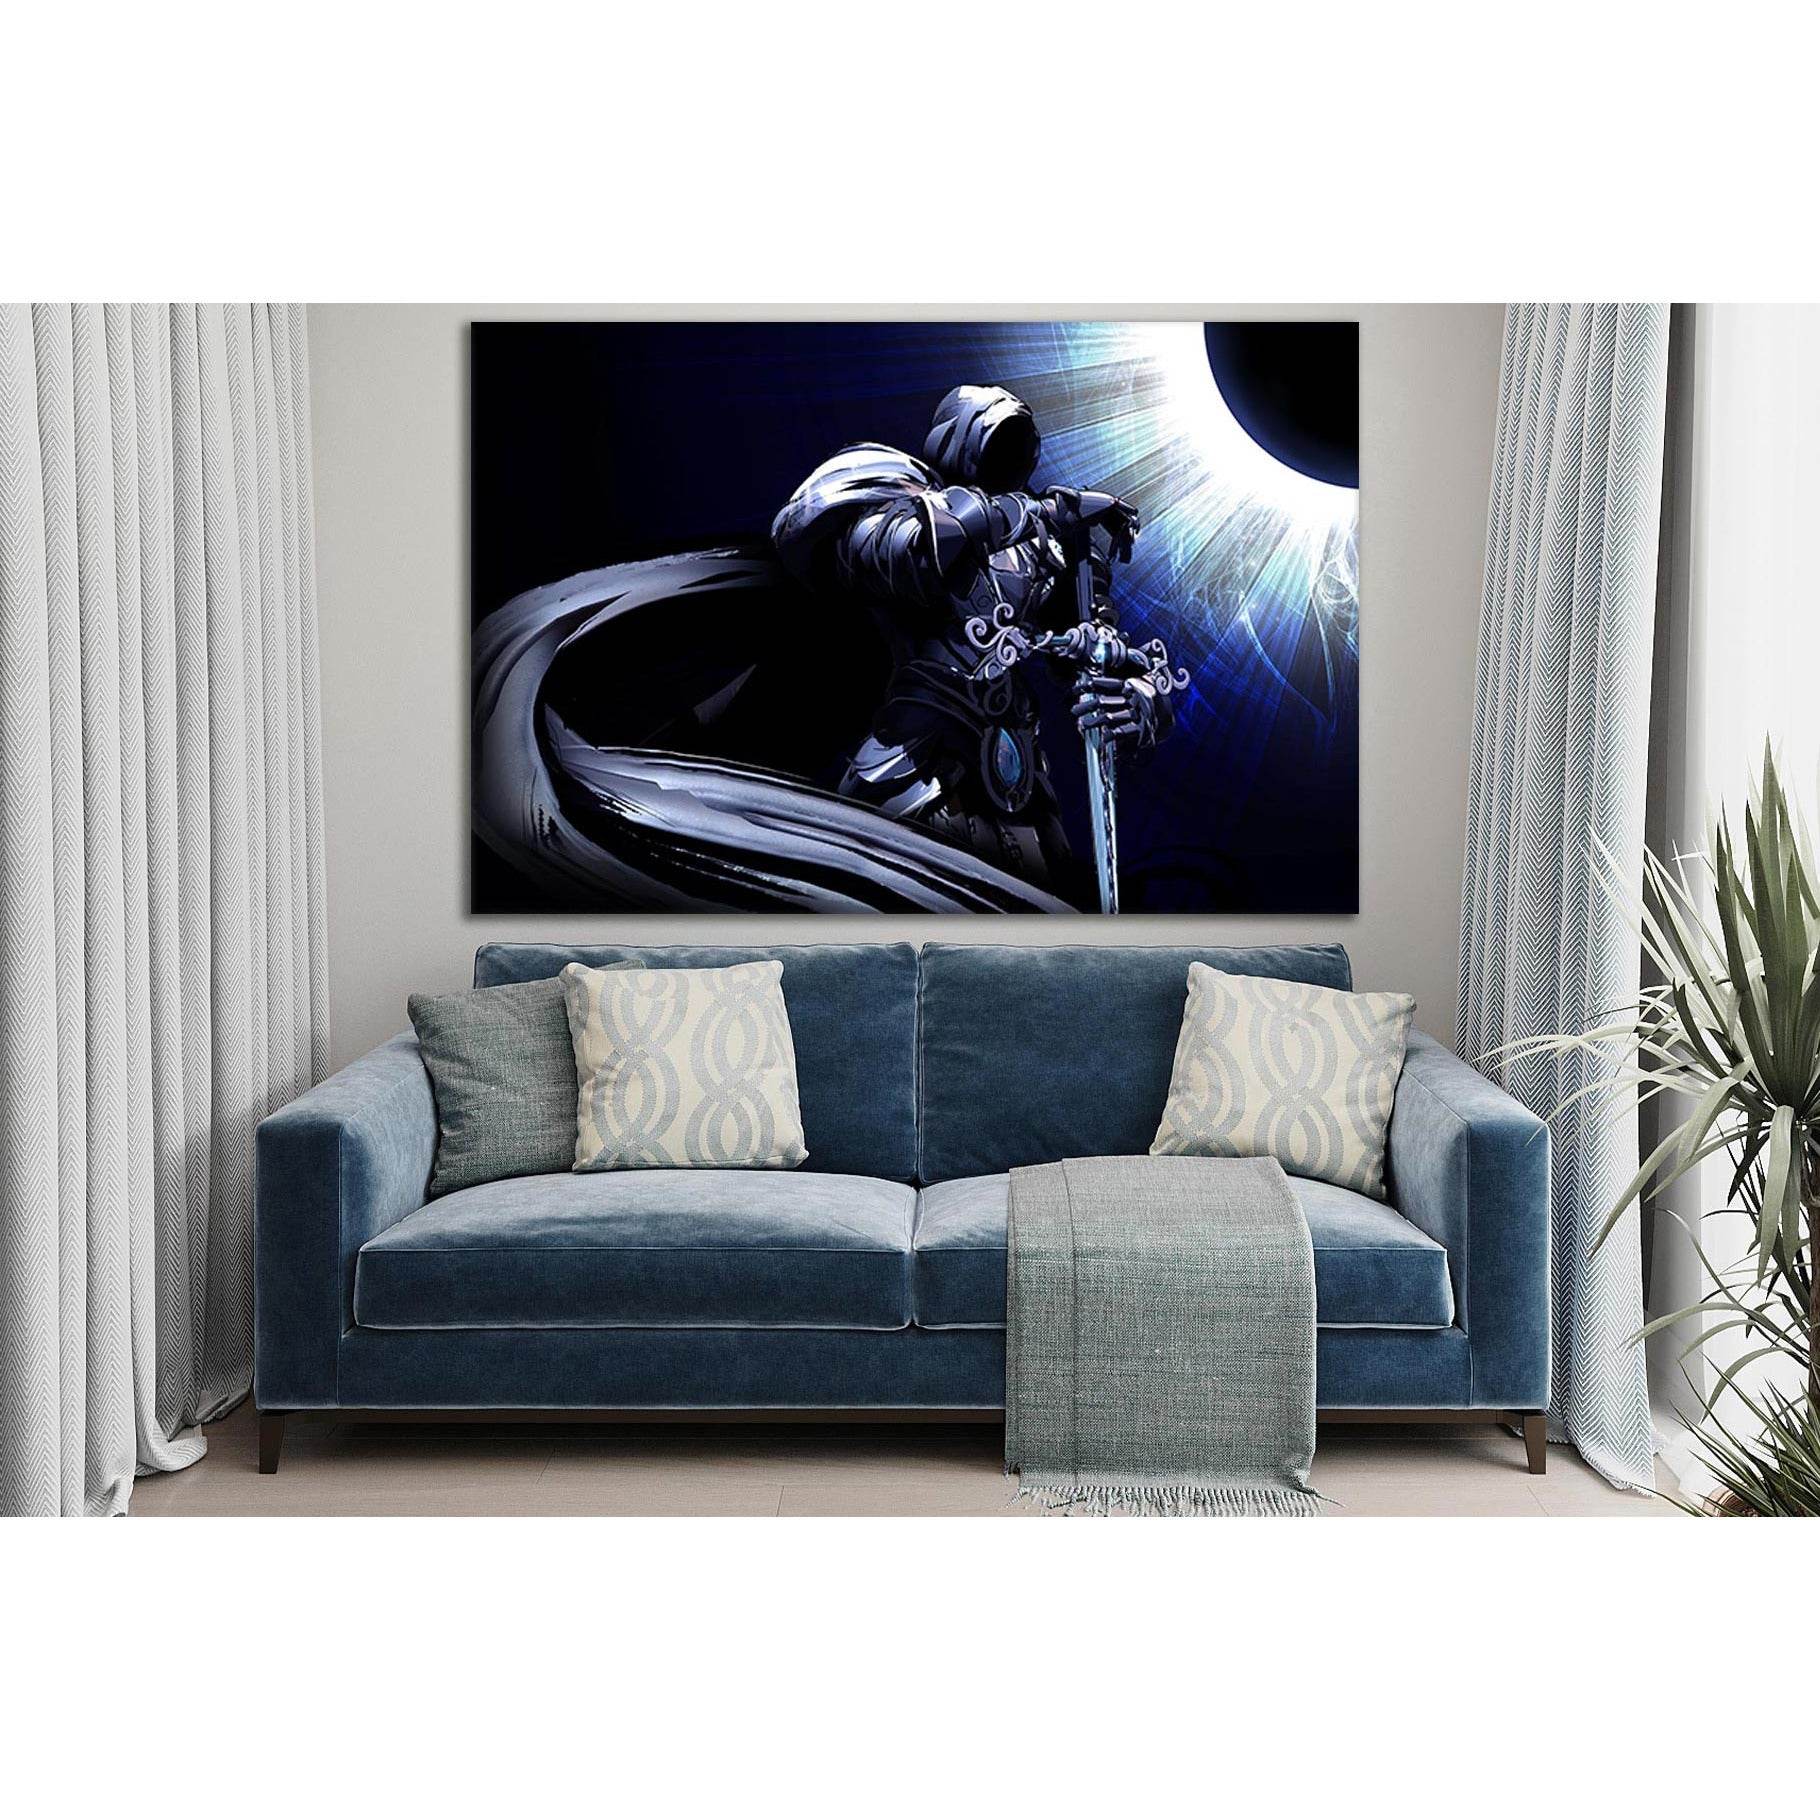 Knight With A Long Cloak №SL1216 Ready to Hang Canvas Print